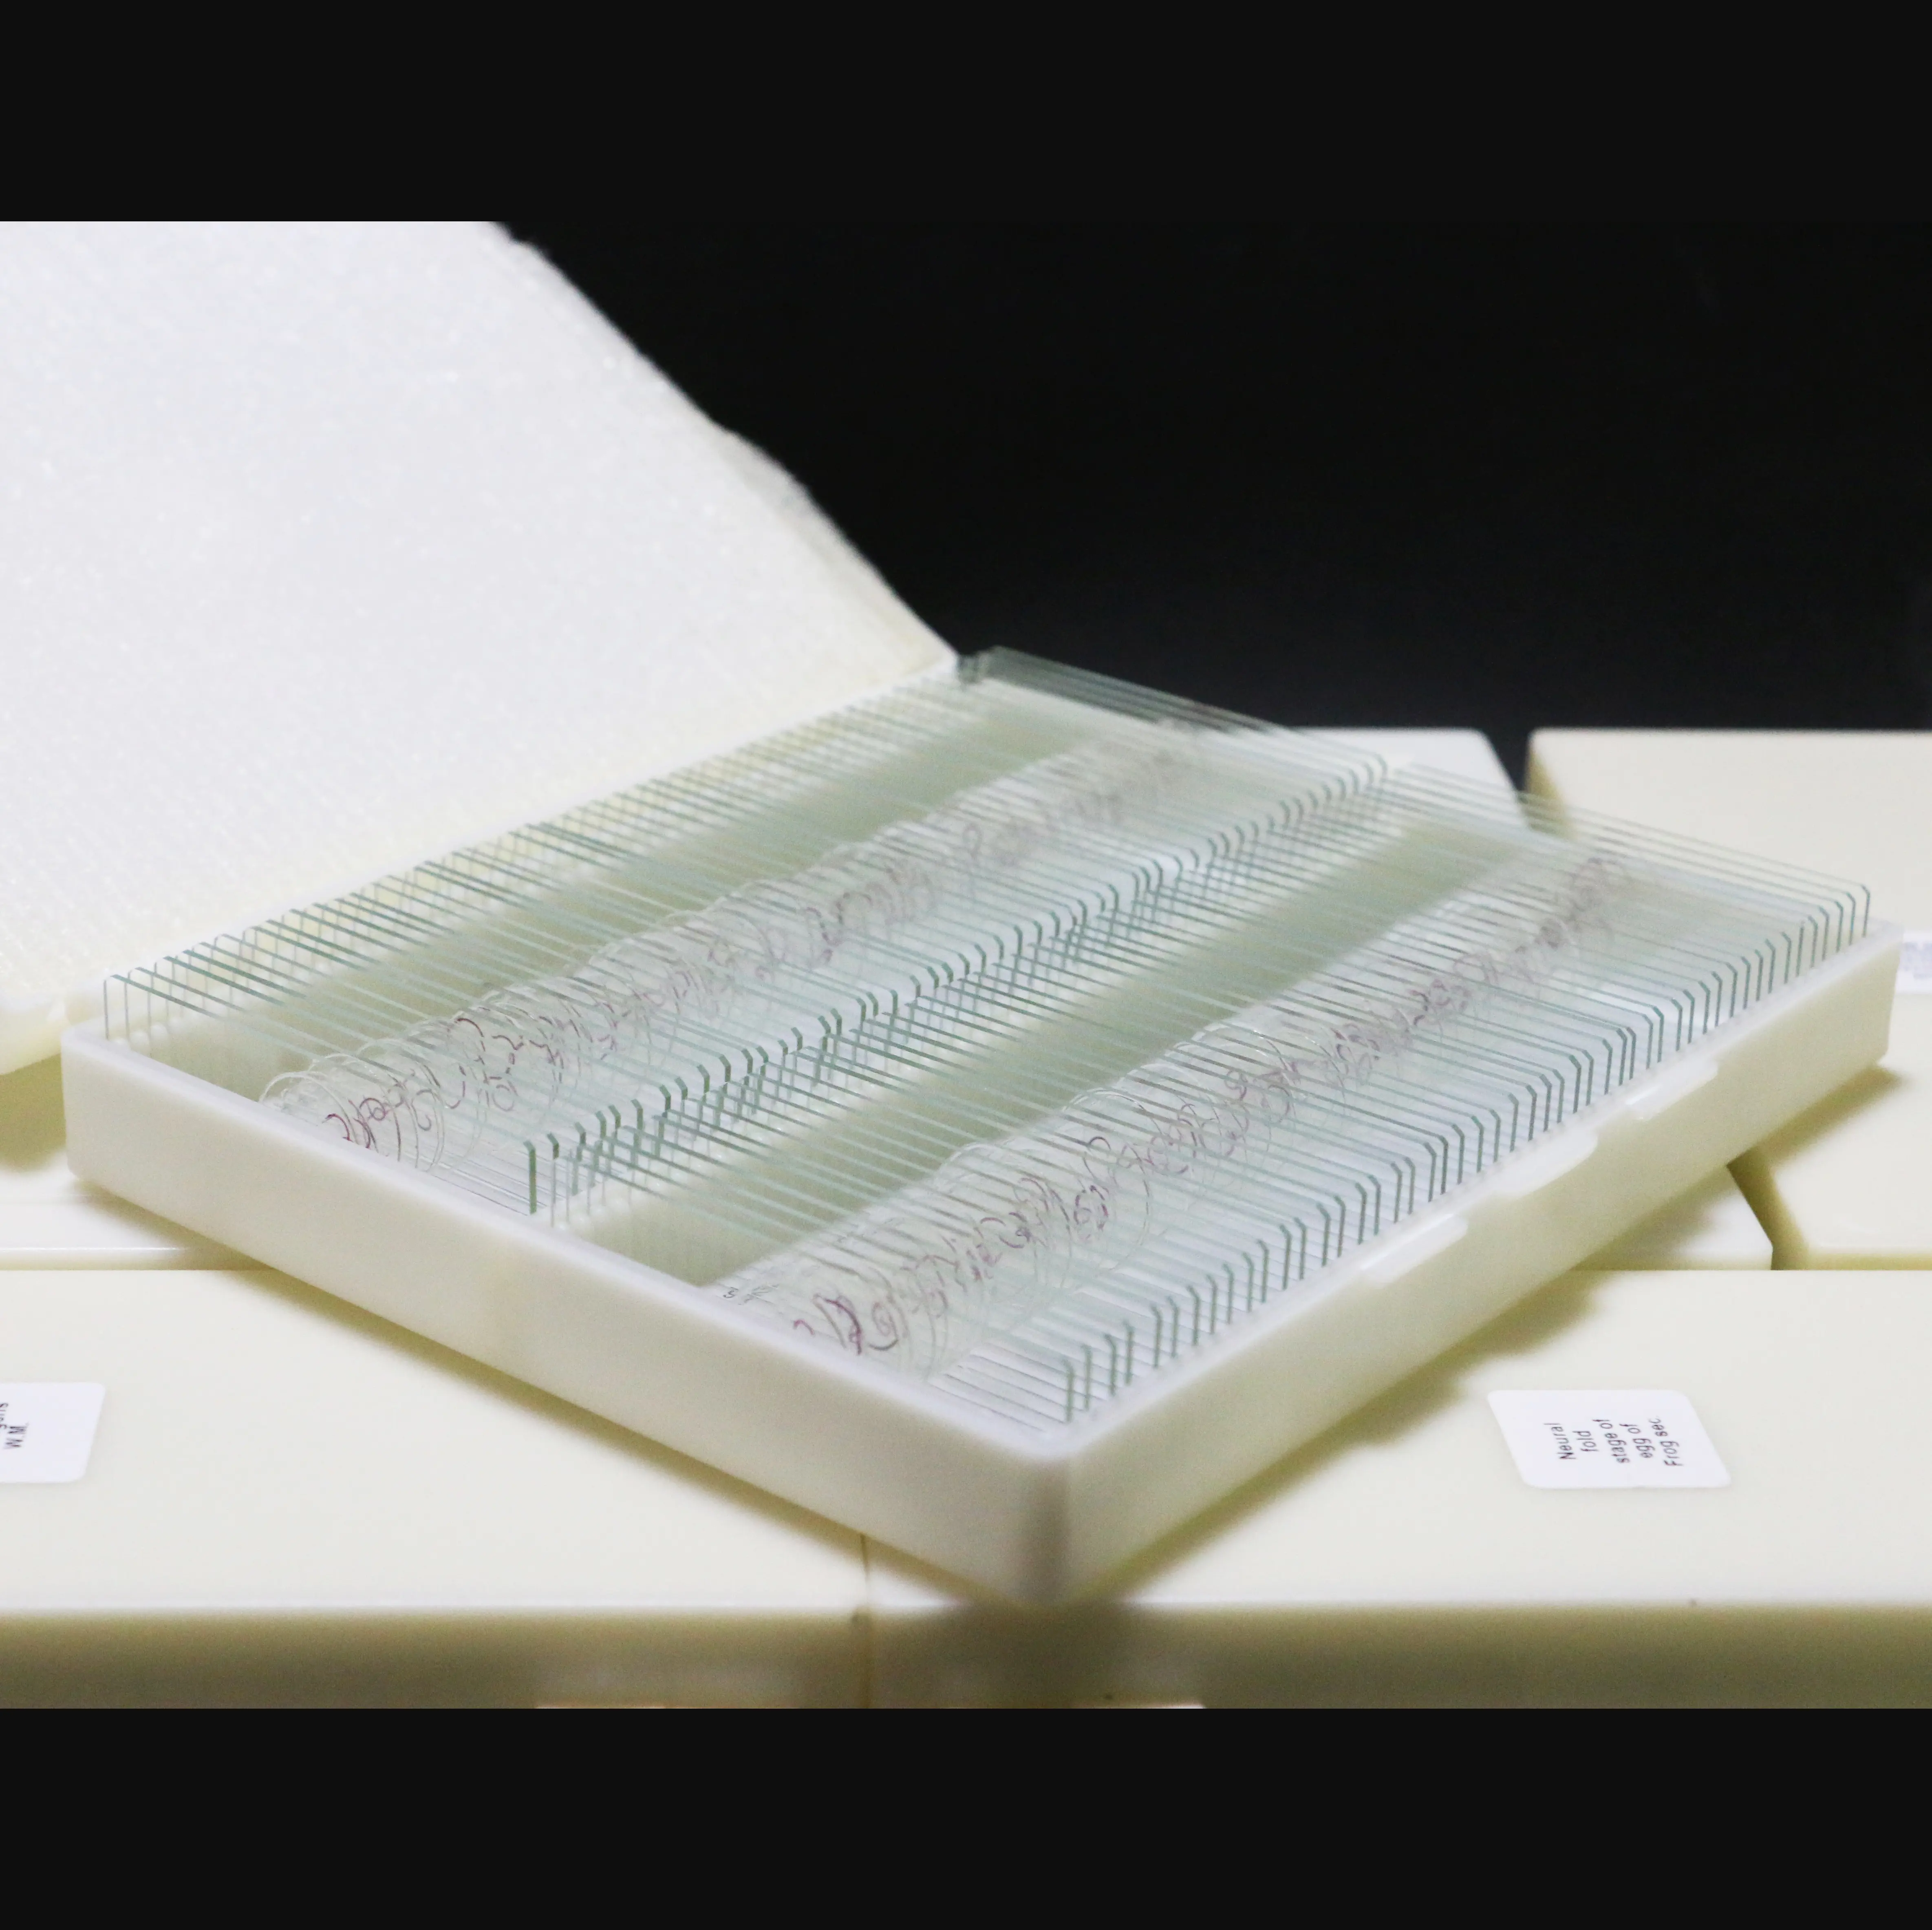 Medical science 18pcs biology prepared microscope slides plant animal cell tissue slides with best price